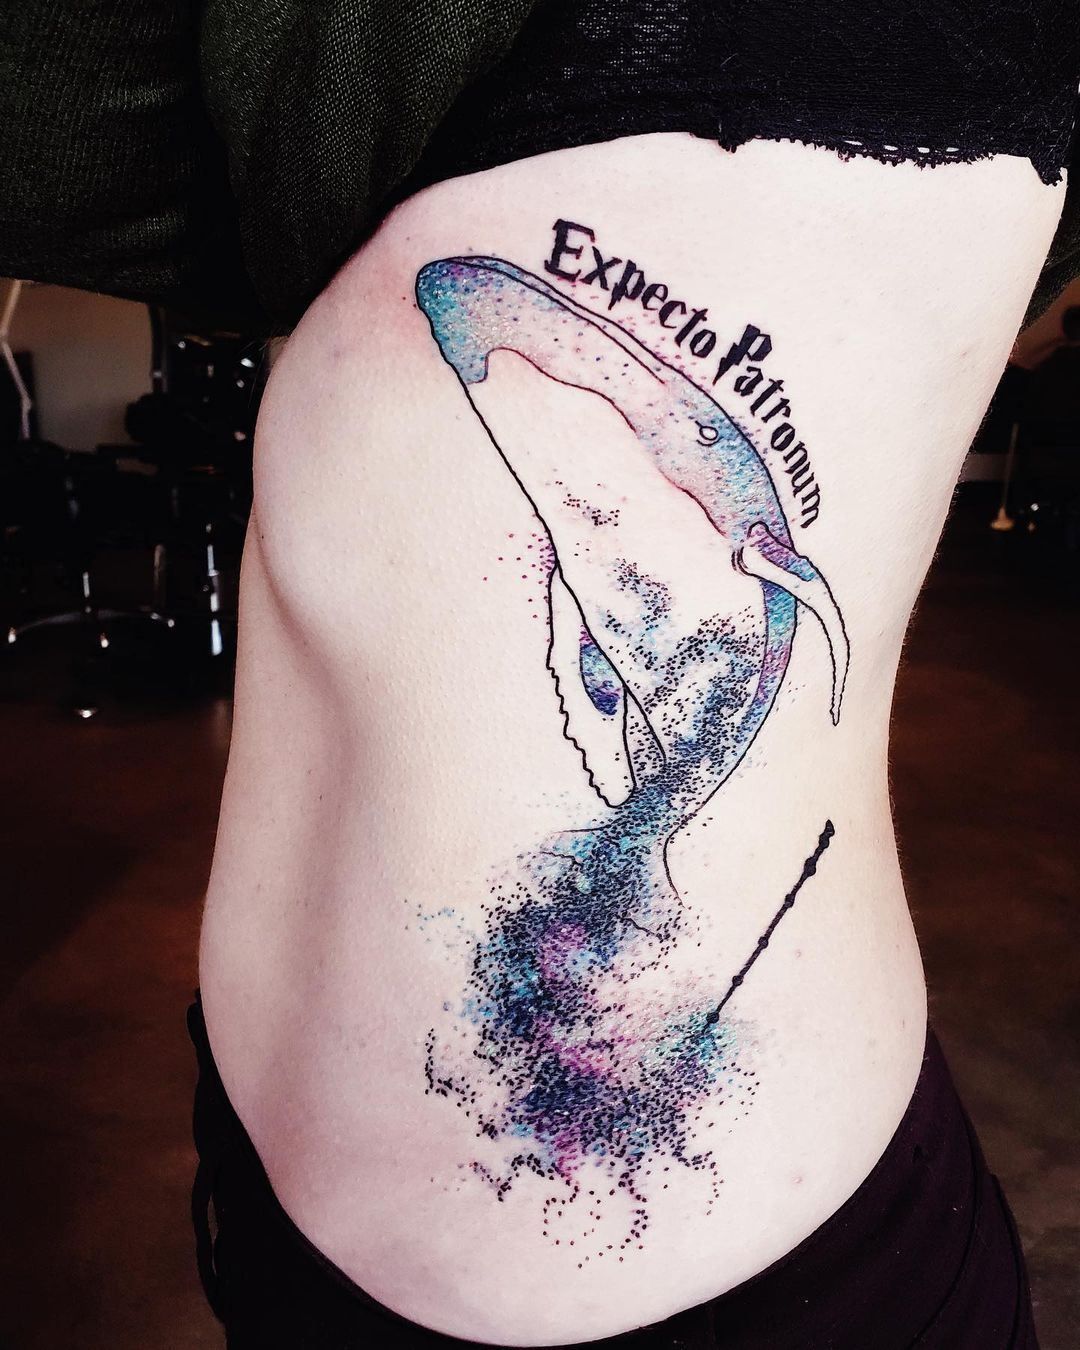 25 Tattoos With Seriously Cool and Inspiring Mental Health Messages